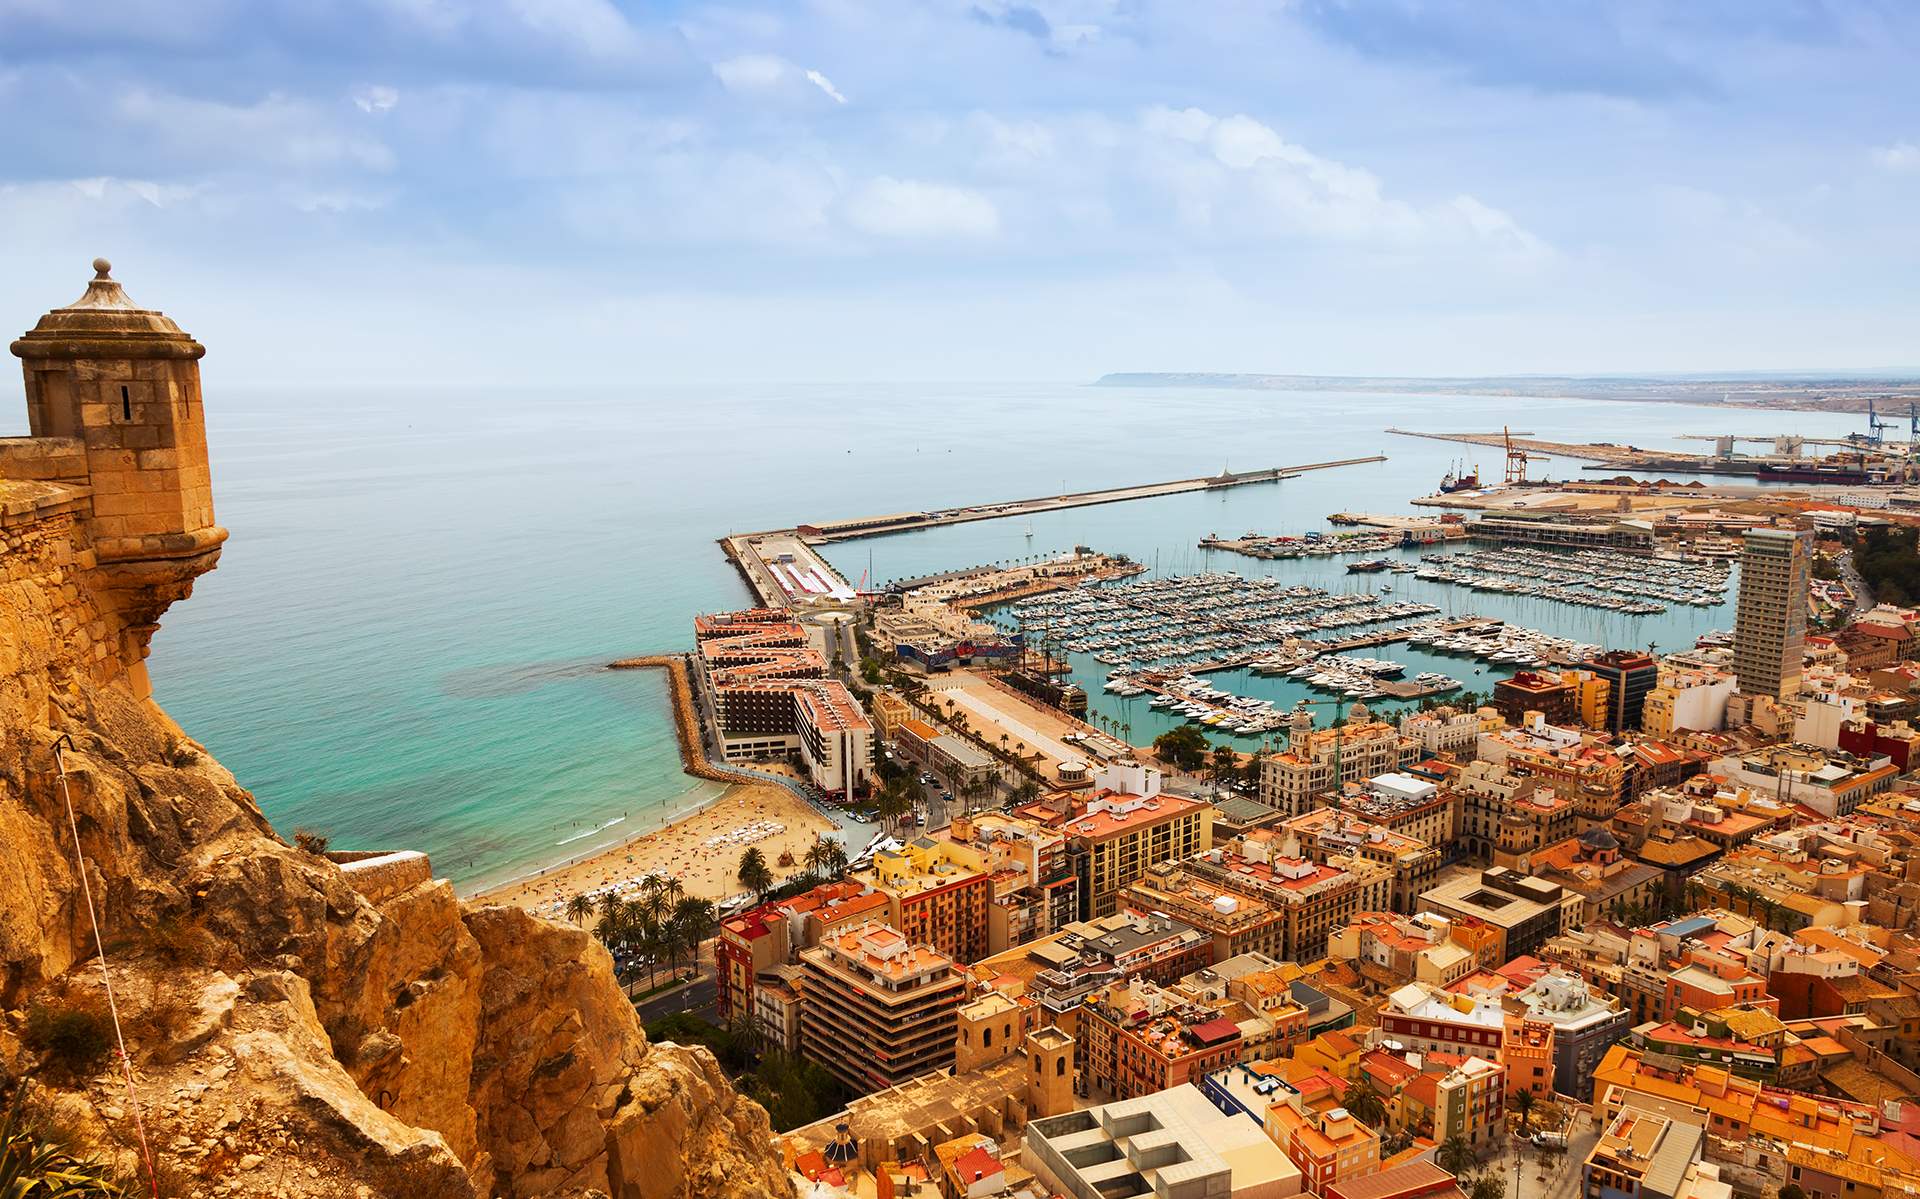 alicante-with-docked-yachts-from-castle-spain